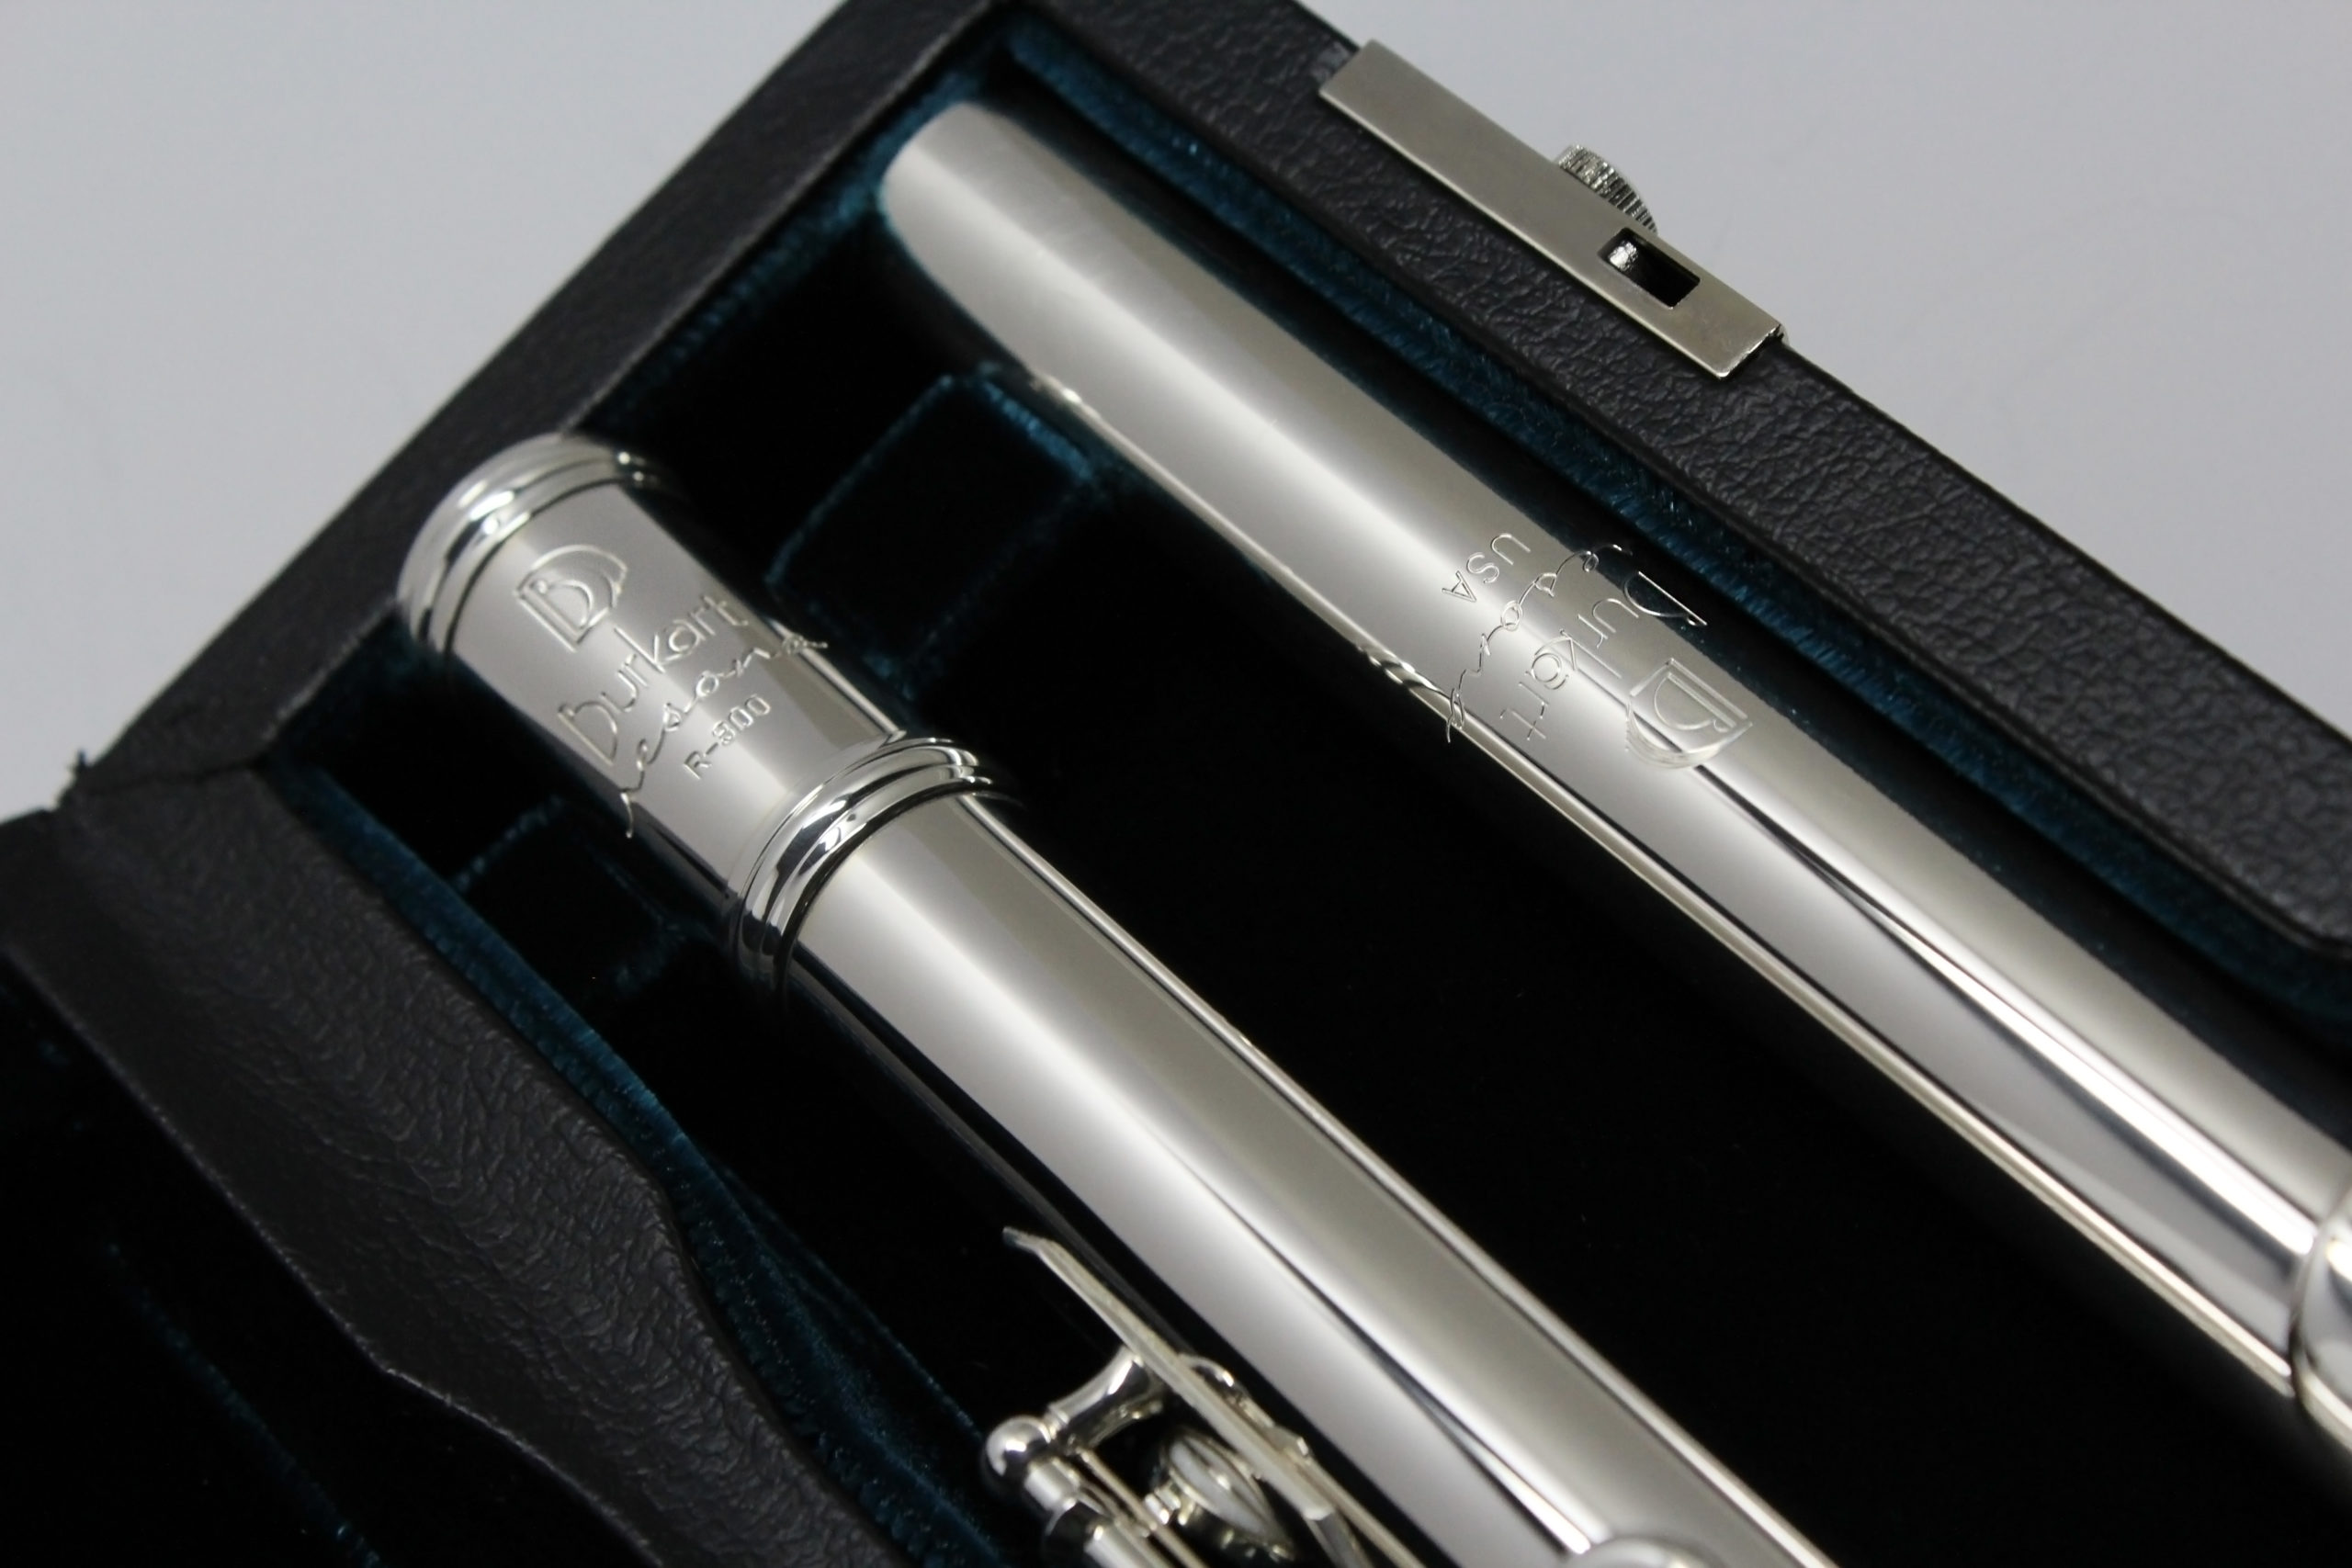 Burkart Flute in Case with Case Cover